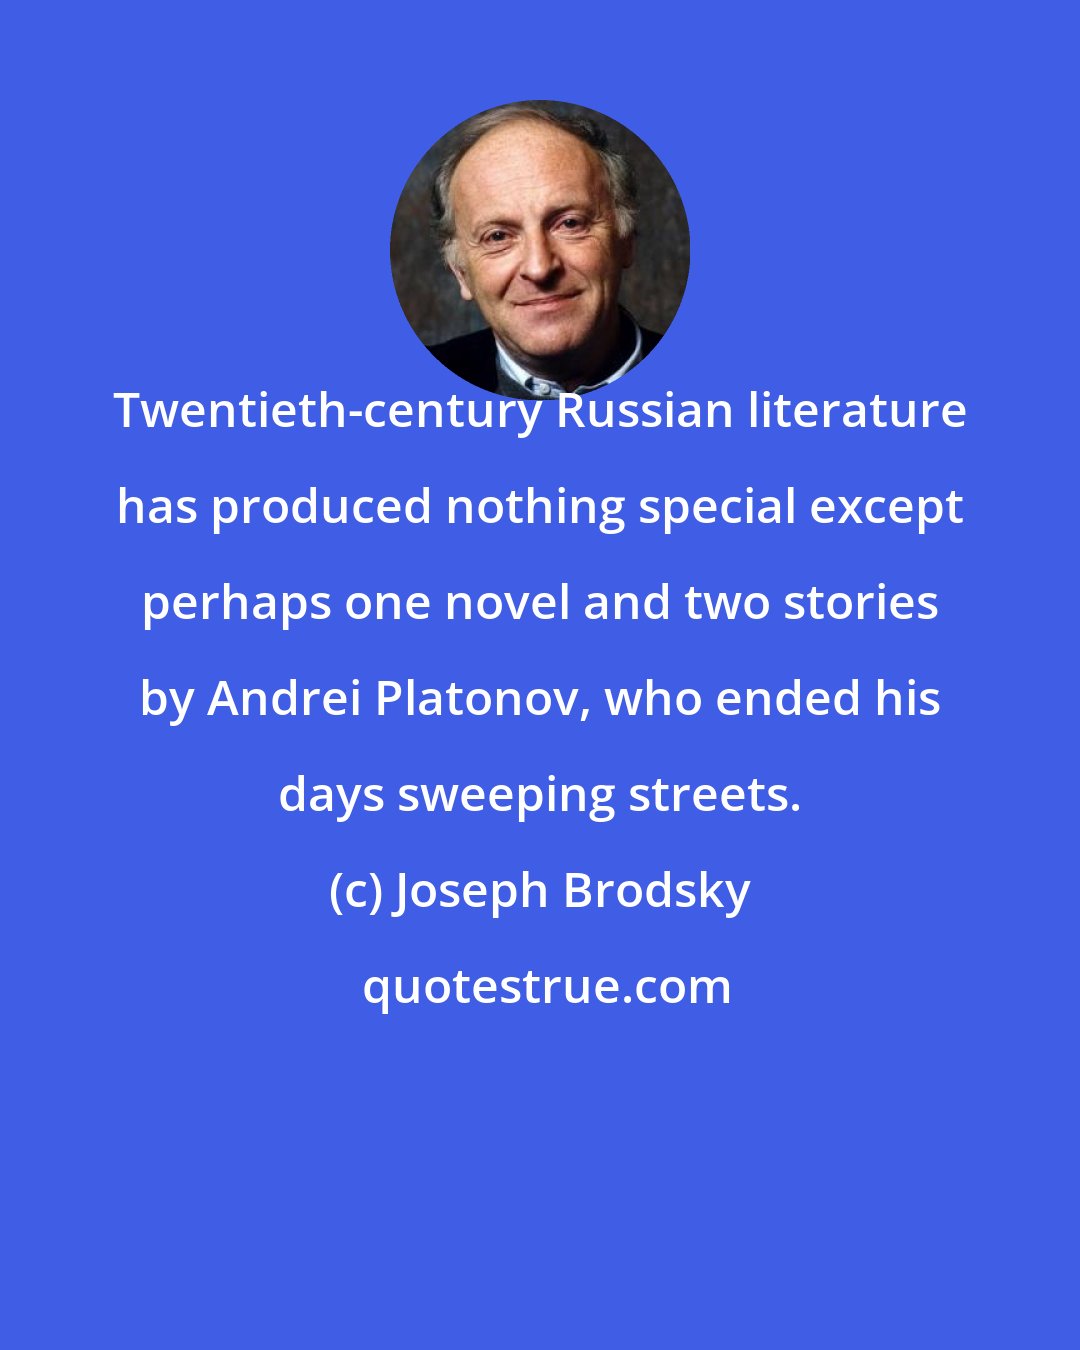 Joseph Brodsky: Twentieth-century Russian literature has produced nothing special except perhaps one novel and two stories by Andrei Platonov, who ended his days sweeping streets.